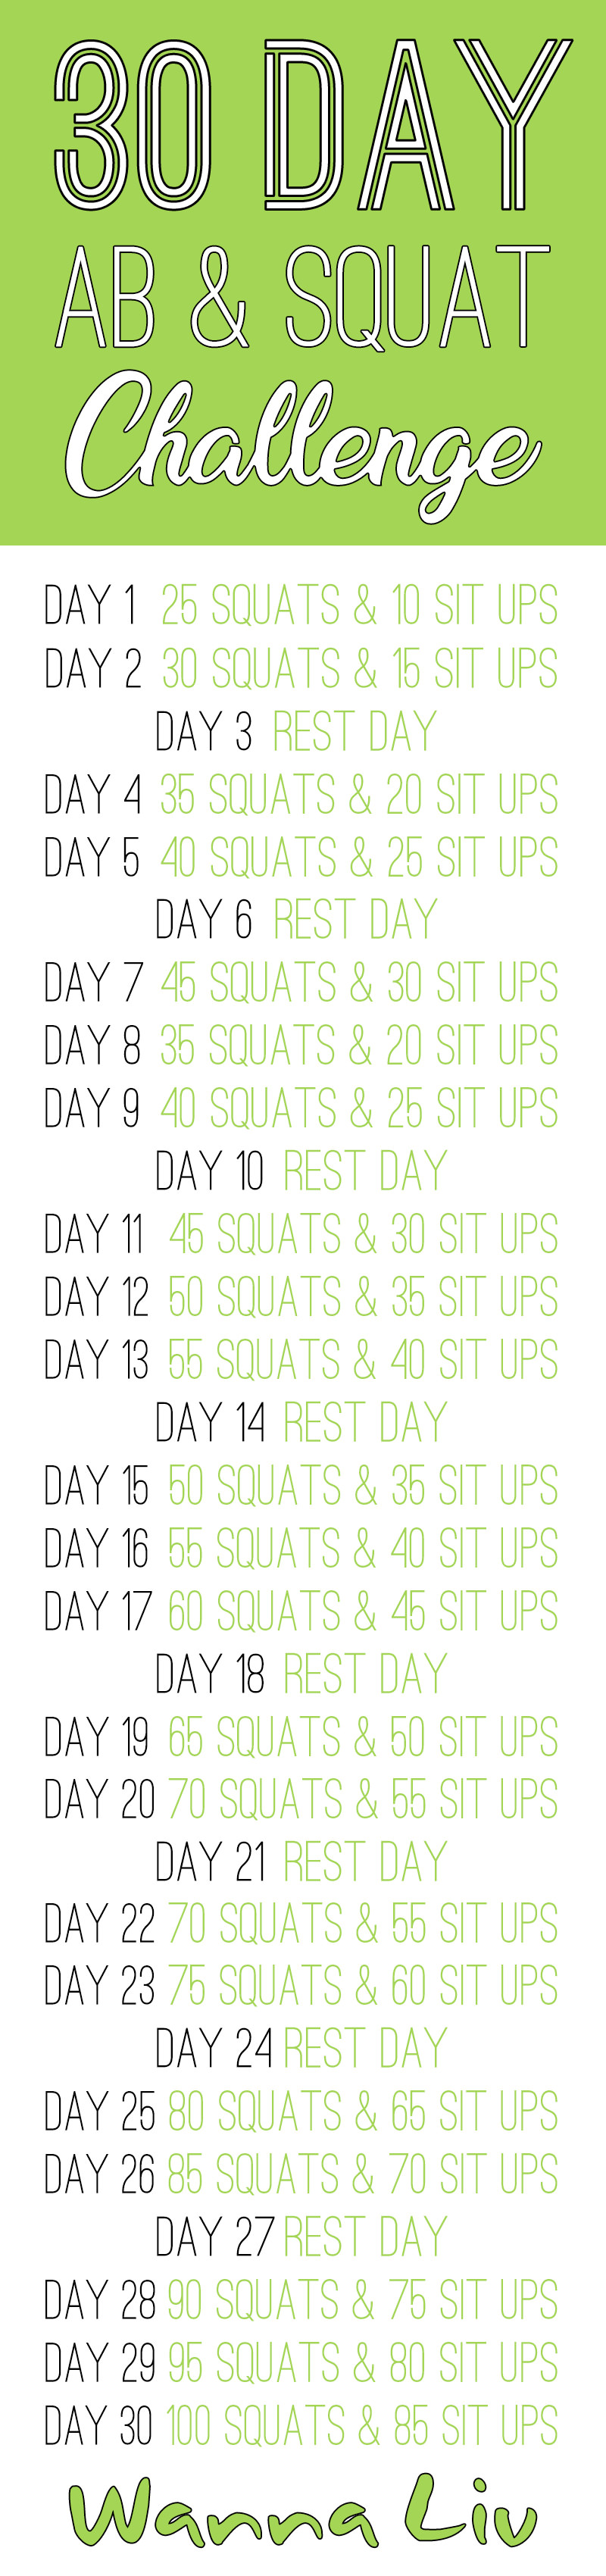 Save this free 30 Day Ab and Squat Challenge chart for later or if you're interested in starting this challenge! #wannaliv